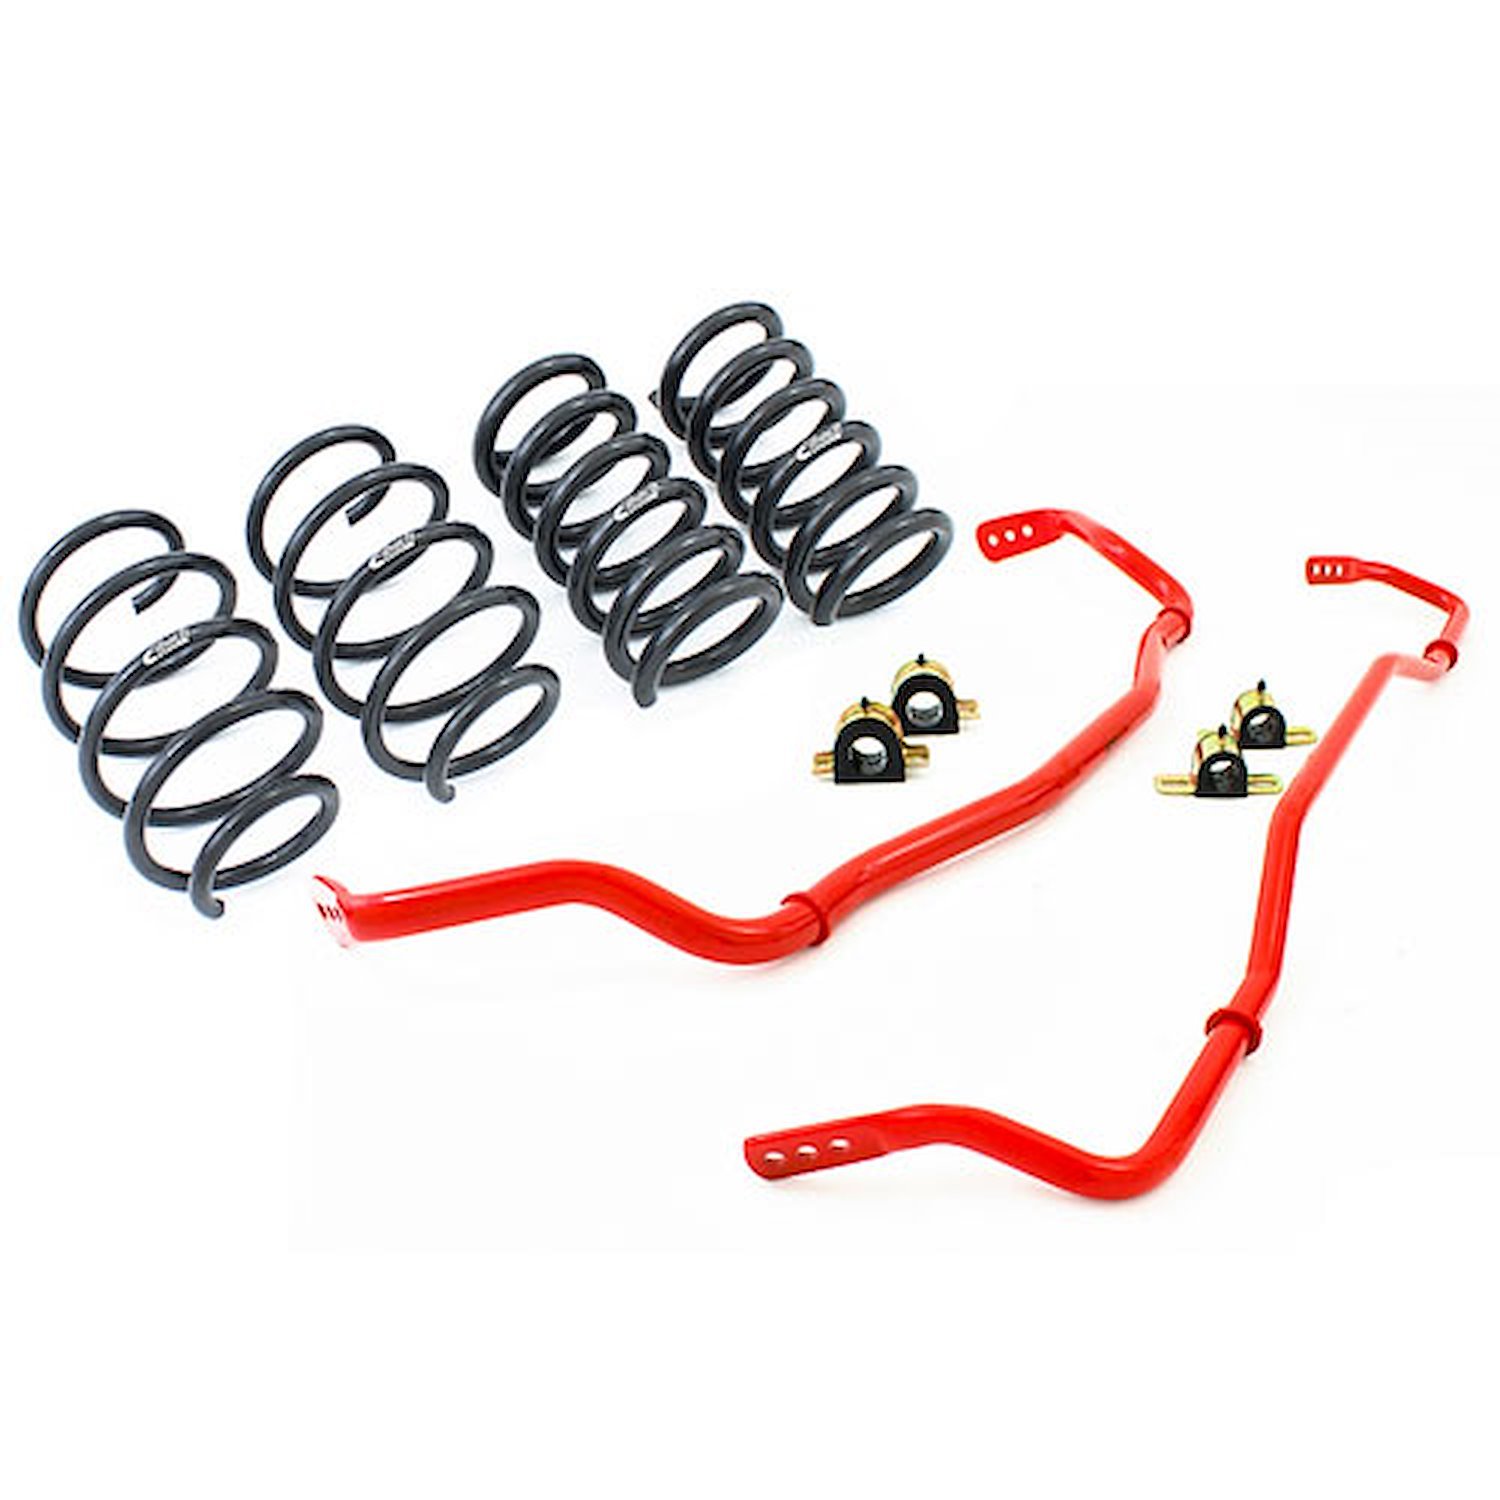 35145.880 Pro-System-Plus Suspension Kit 2015-16 Ford Mustang GT